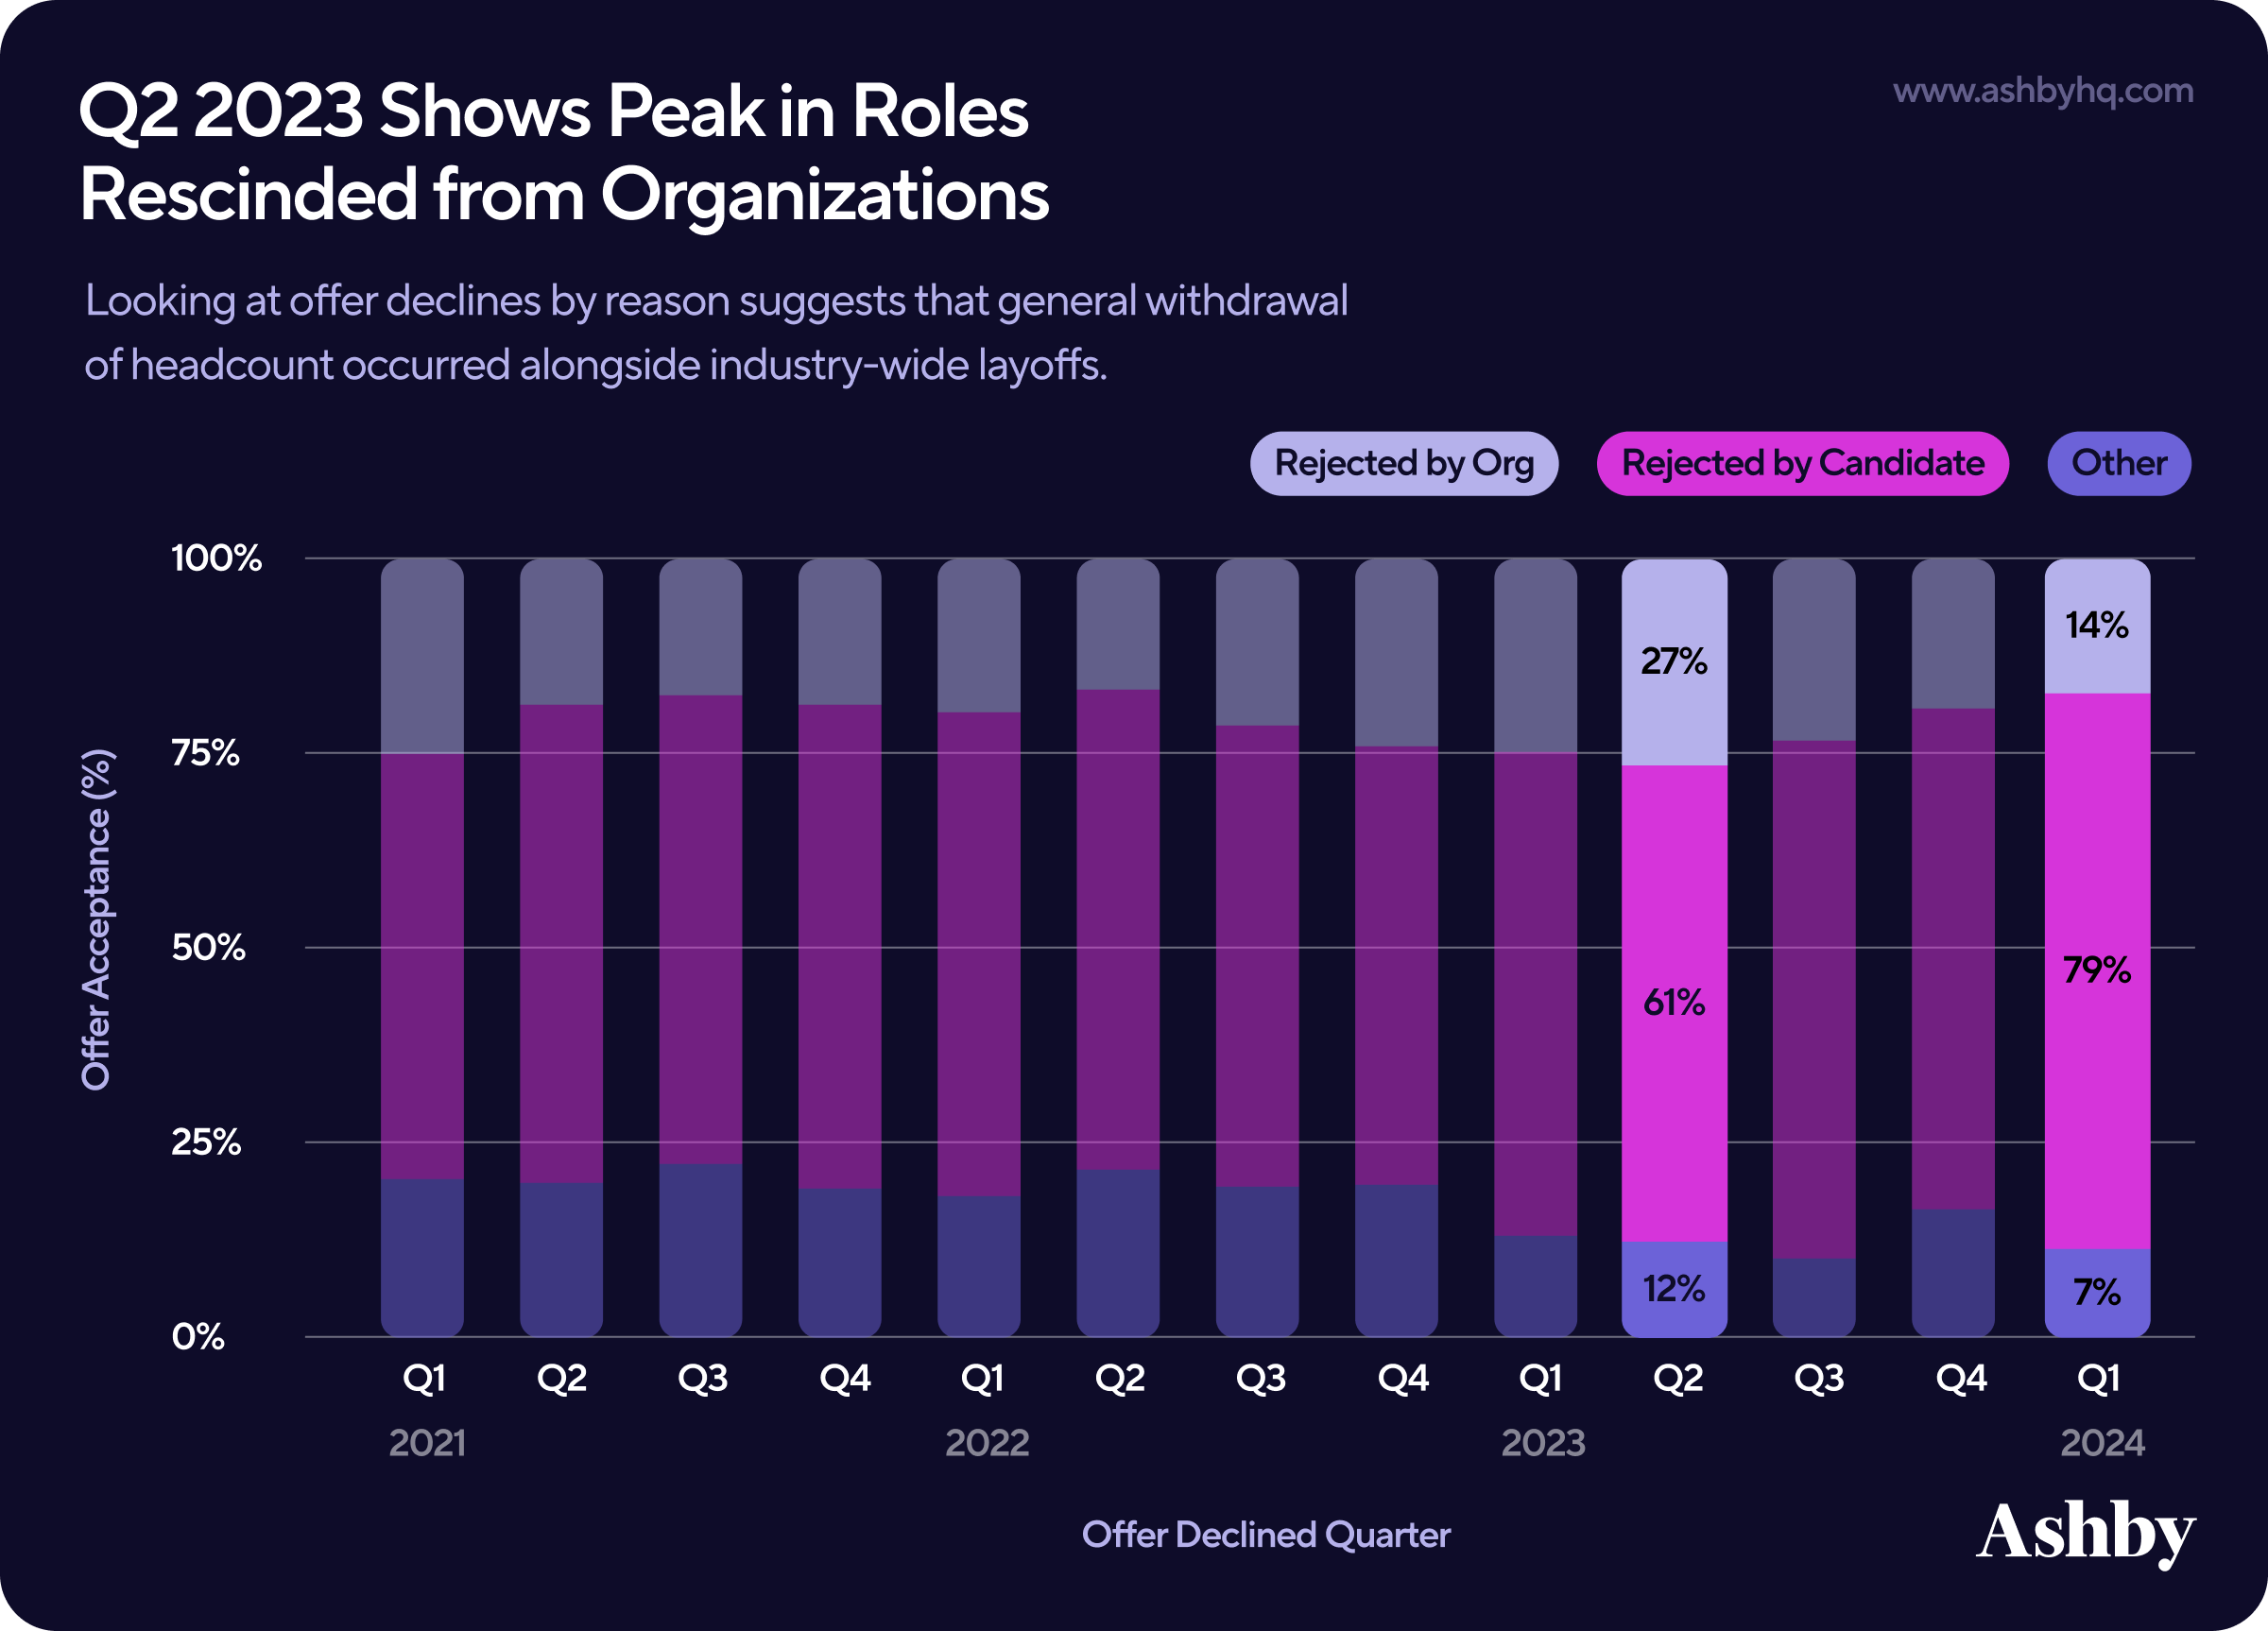 Q2 2023 Shows Peak in Job Roles Rescinded from Organizations